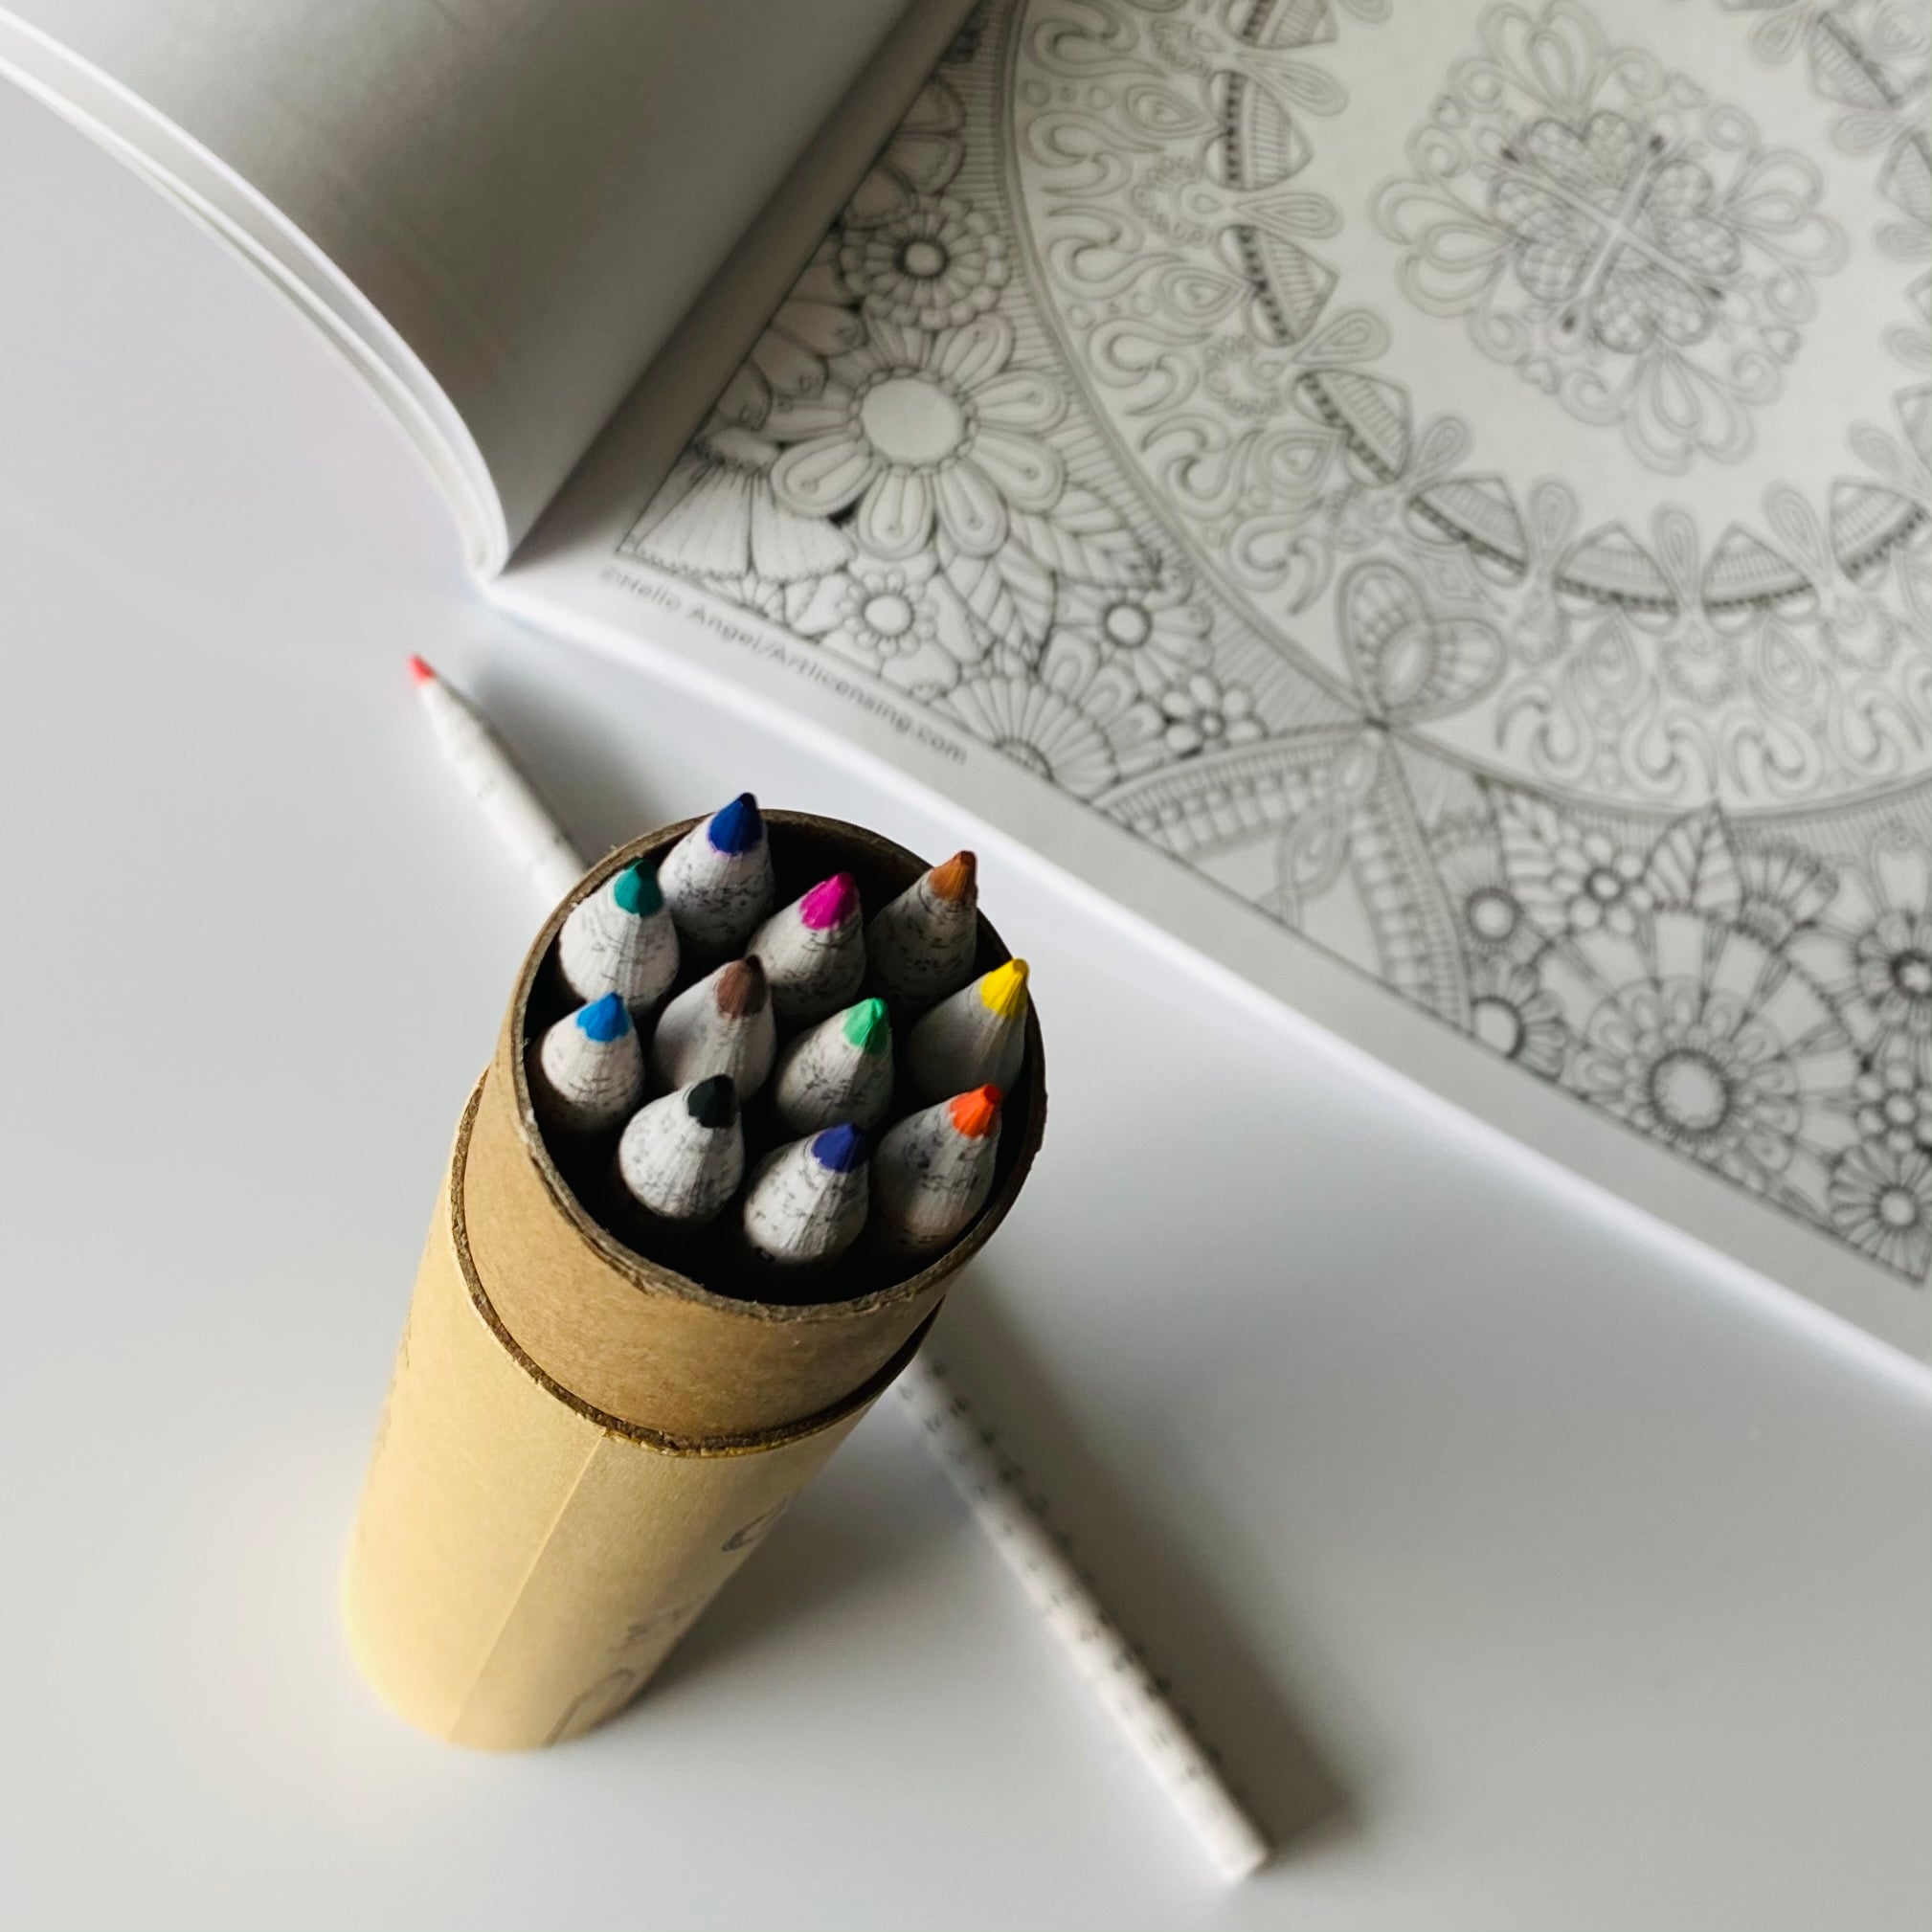 Colored Pencils, Pens, & Markers for Adult Coloring Books - Awake & Mindful